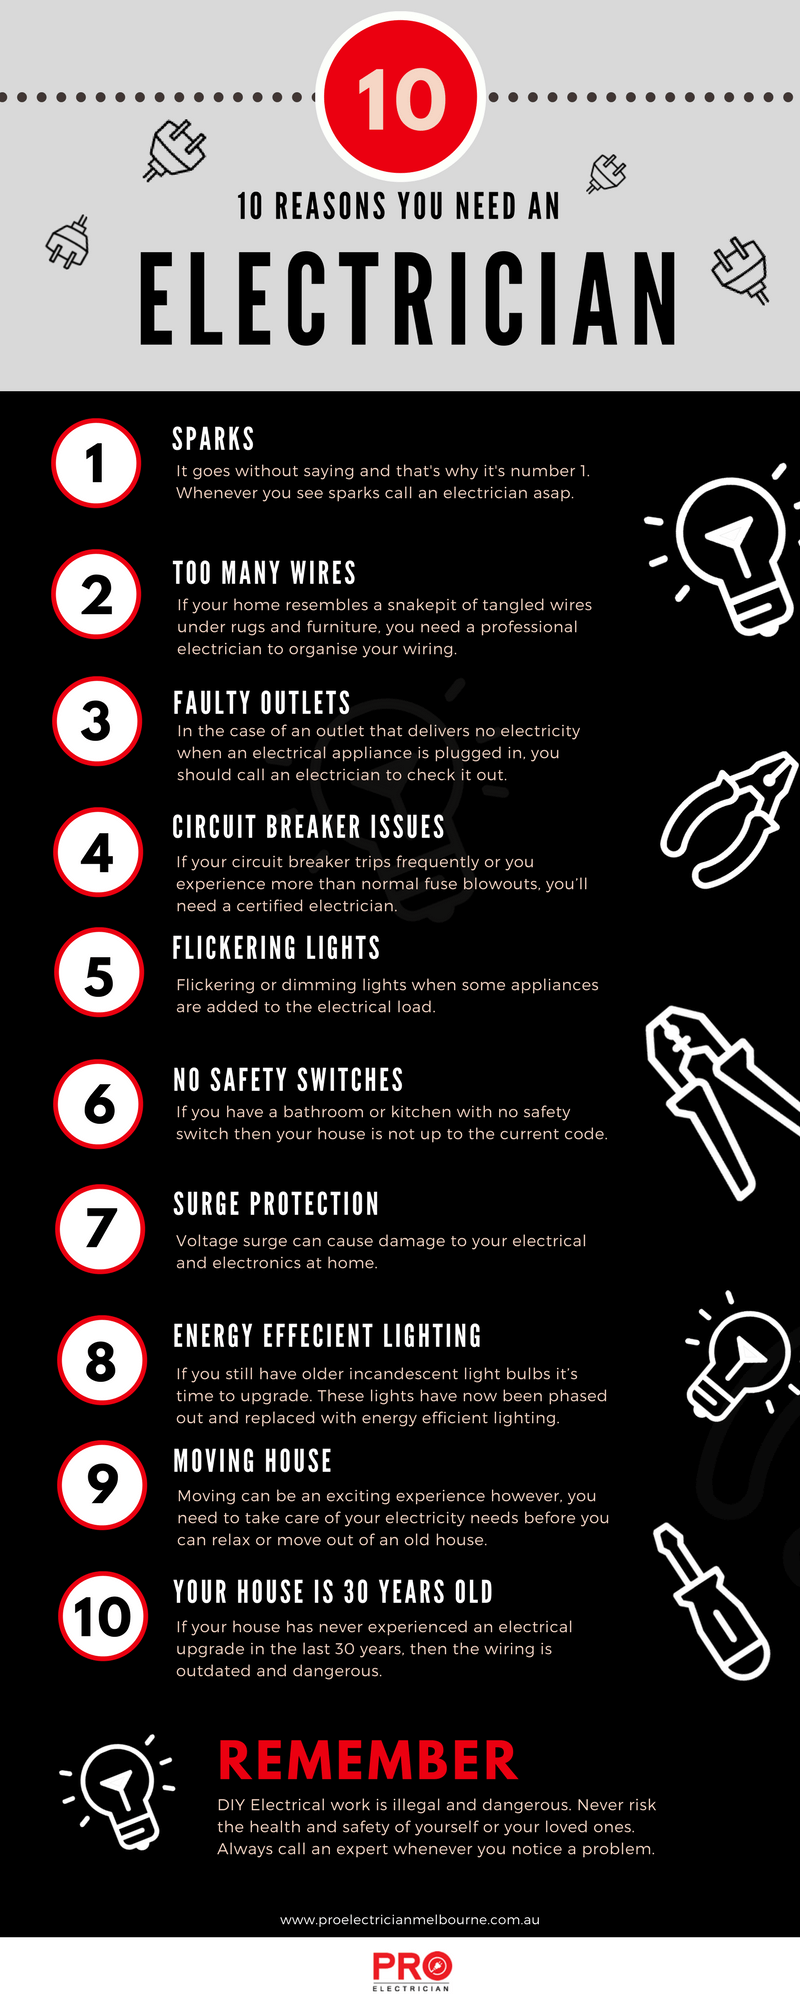 10 Reasons To Call An Electrician By Jones Electrical Services Ltd